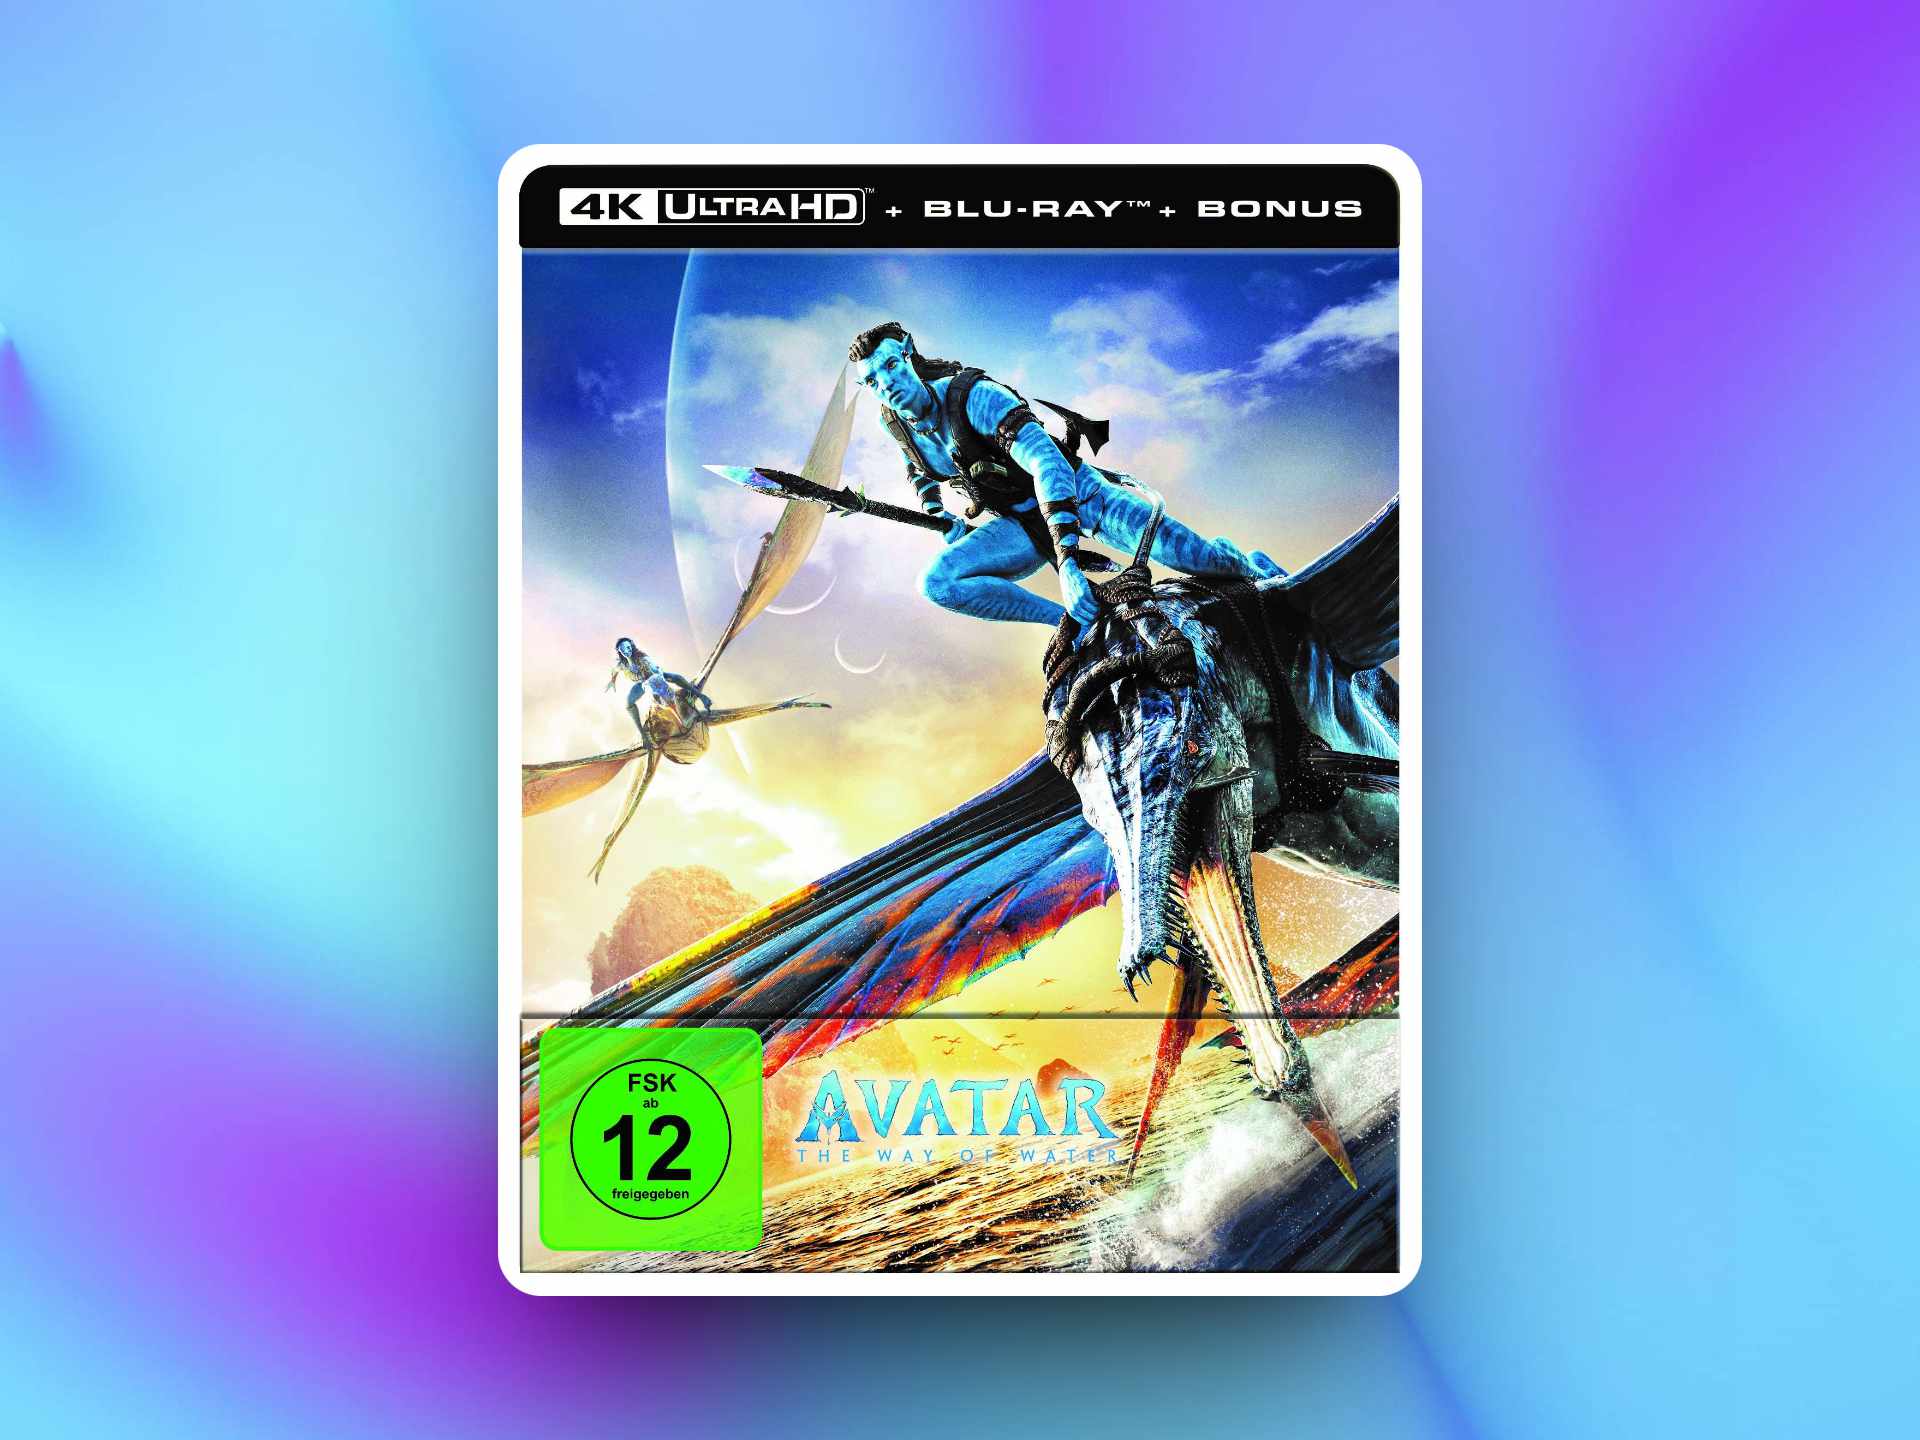 Avatar The Way Of Water Arrives On 4K Ultra HD Bluray 3D Bluray  DVD  June 20 2023 From 20th Century Studios  ScreenConnections